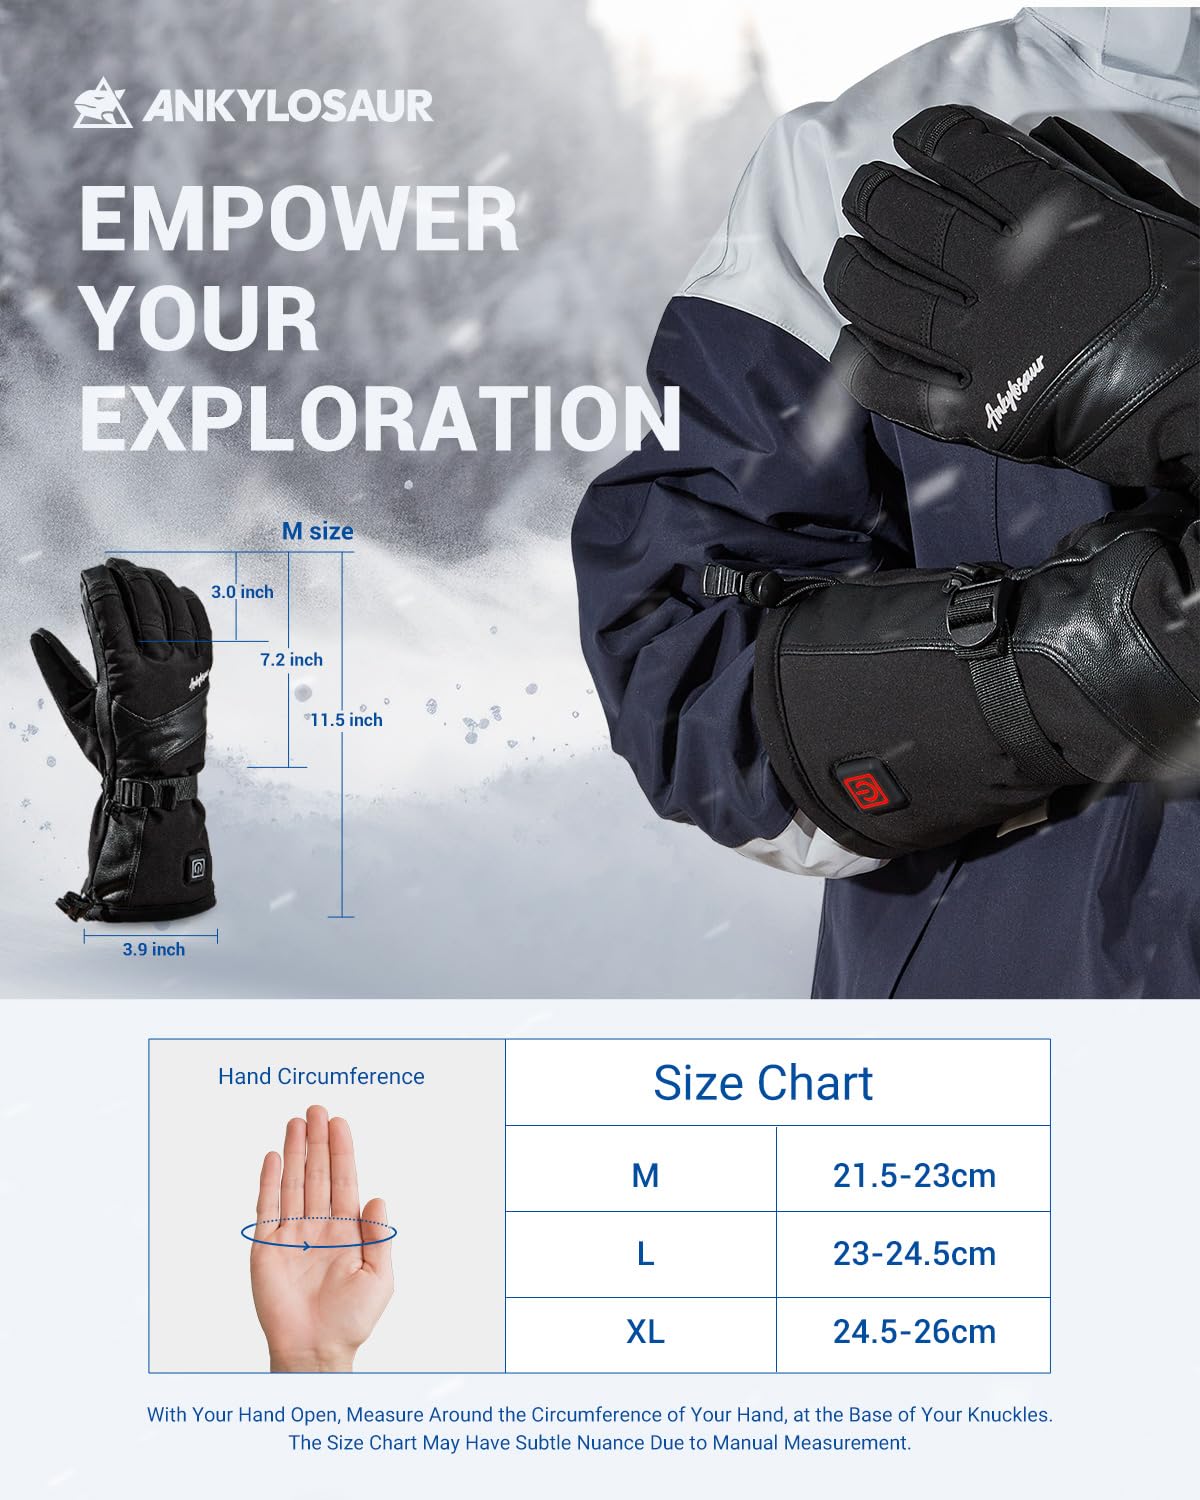 ANKLOSAUR Heated Gloves for Men and Women,Upgraded Thermal Materials, Outdoor Indoor Hand Warmer Glove, Heated Gloves Touchscreen Waterproof, for Climbing Hiking Cycling Skiing Snowboarding